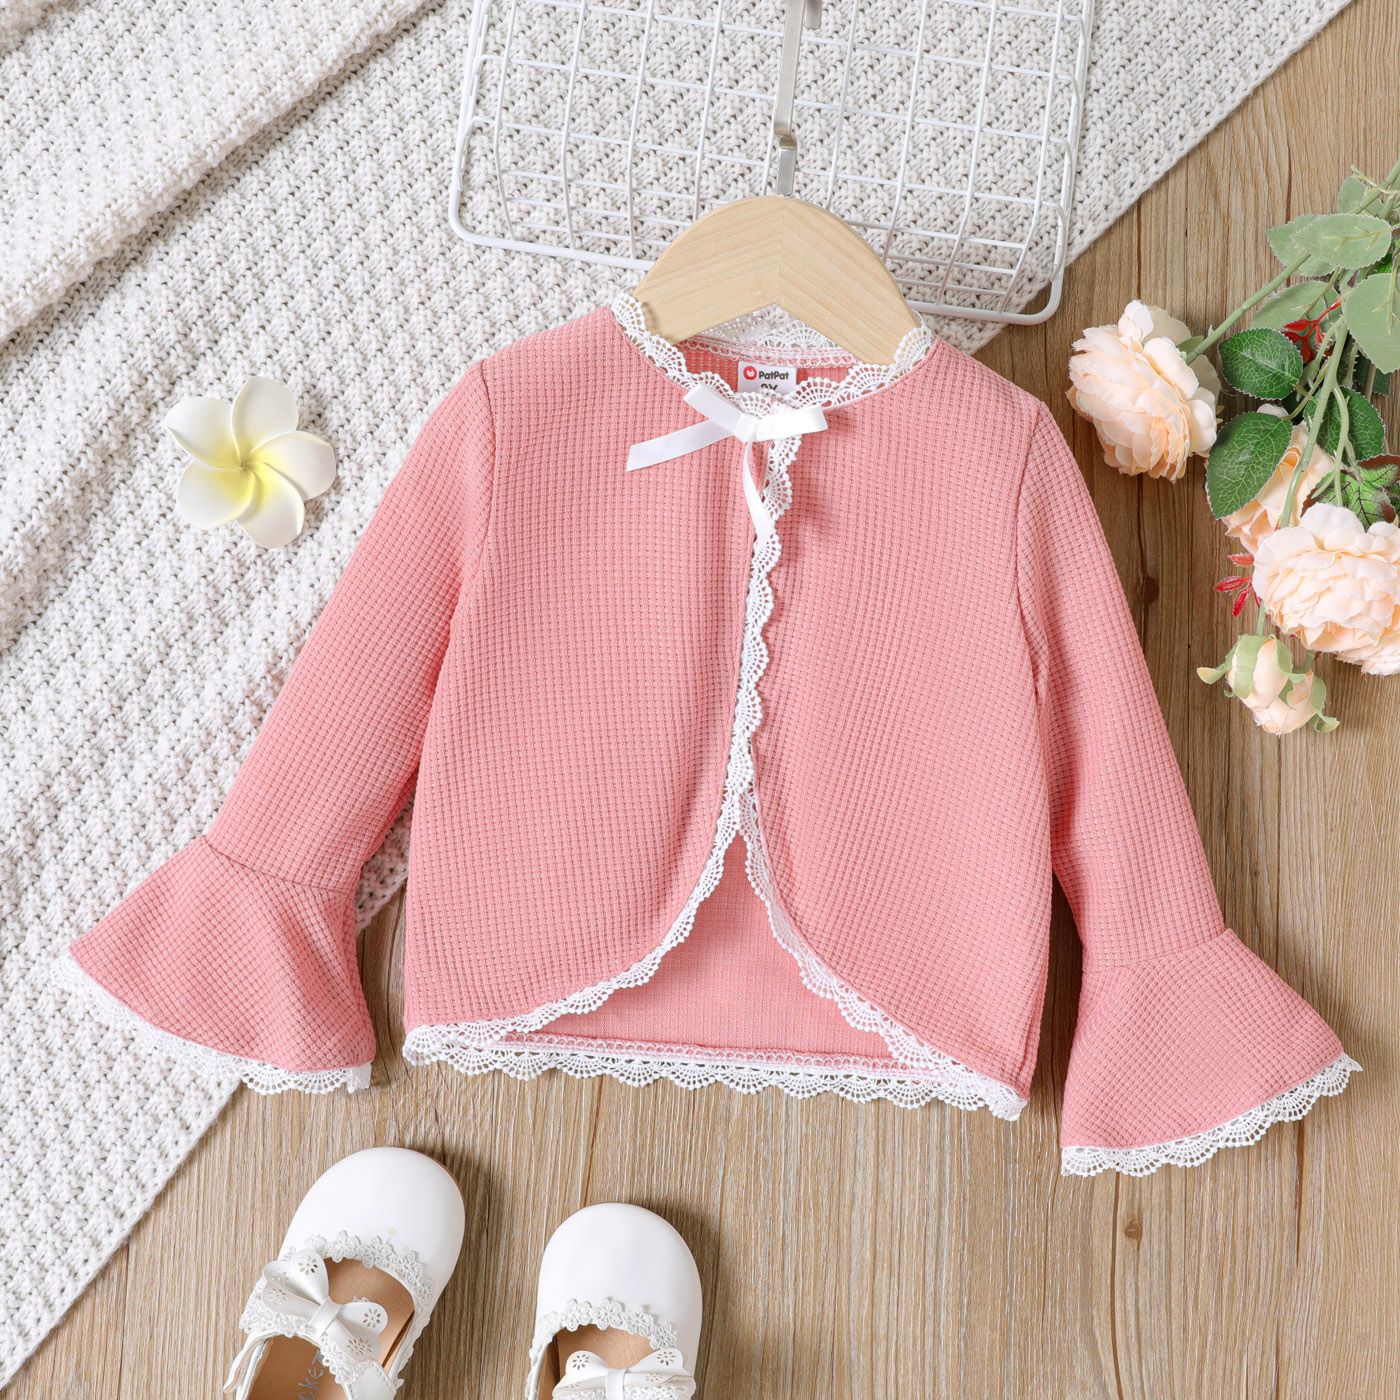 Toddler Girl Lace Trim Bowknot Design Bell Sleeves Jacket Cardigan